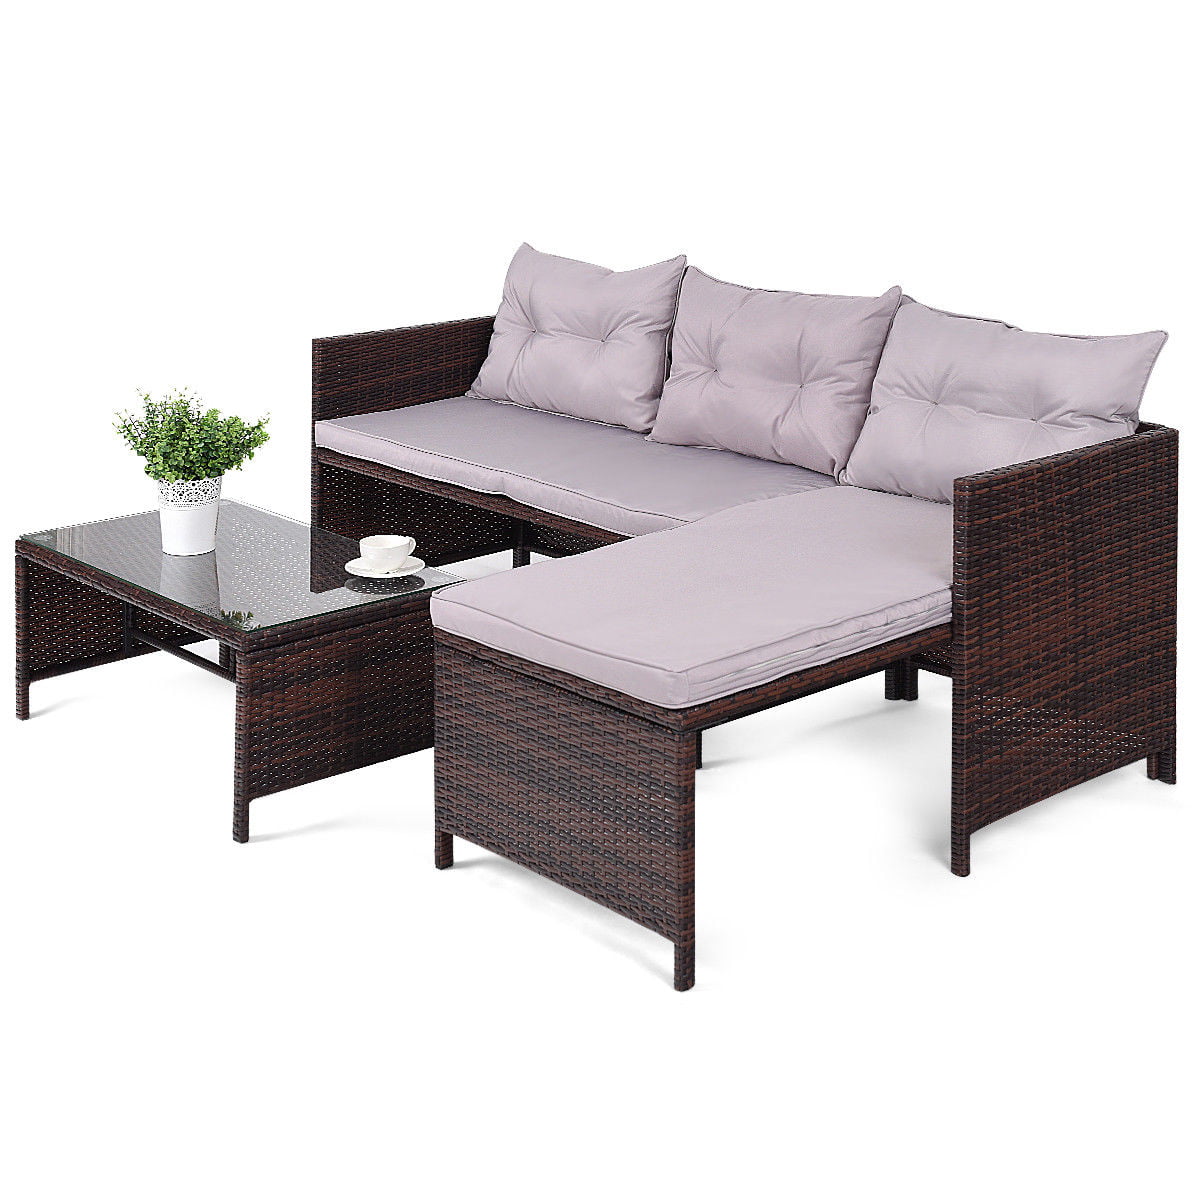 Gymax 3PC Rattan Furniture Sofa Lounge Chaise Set Outdoor ...